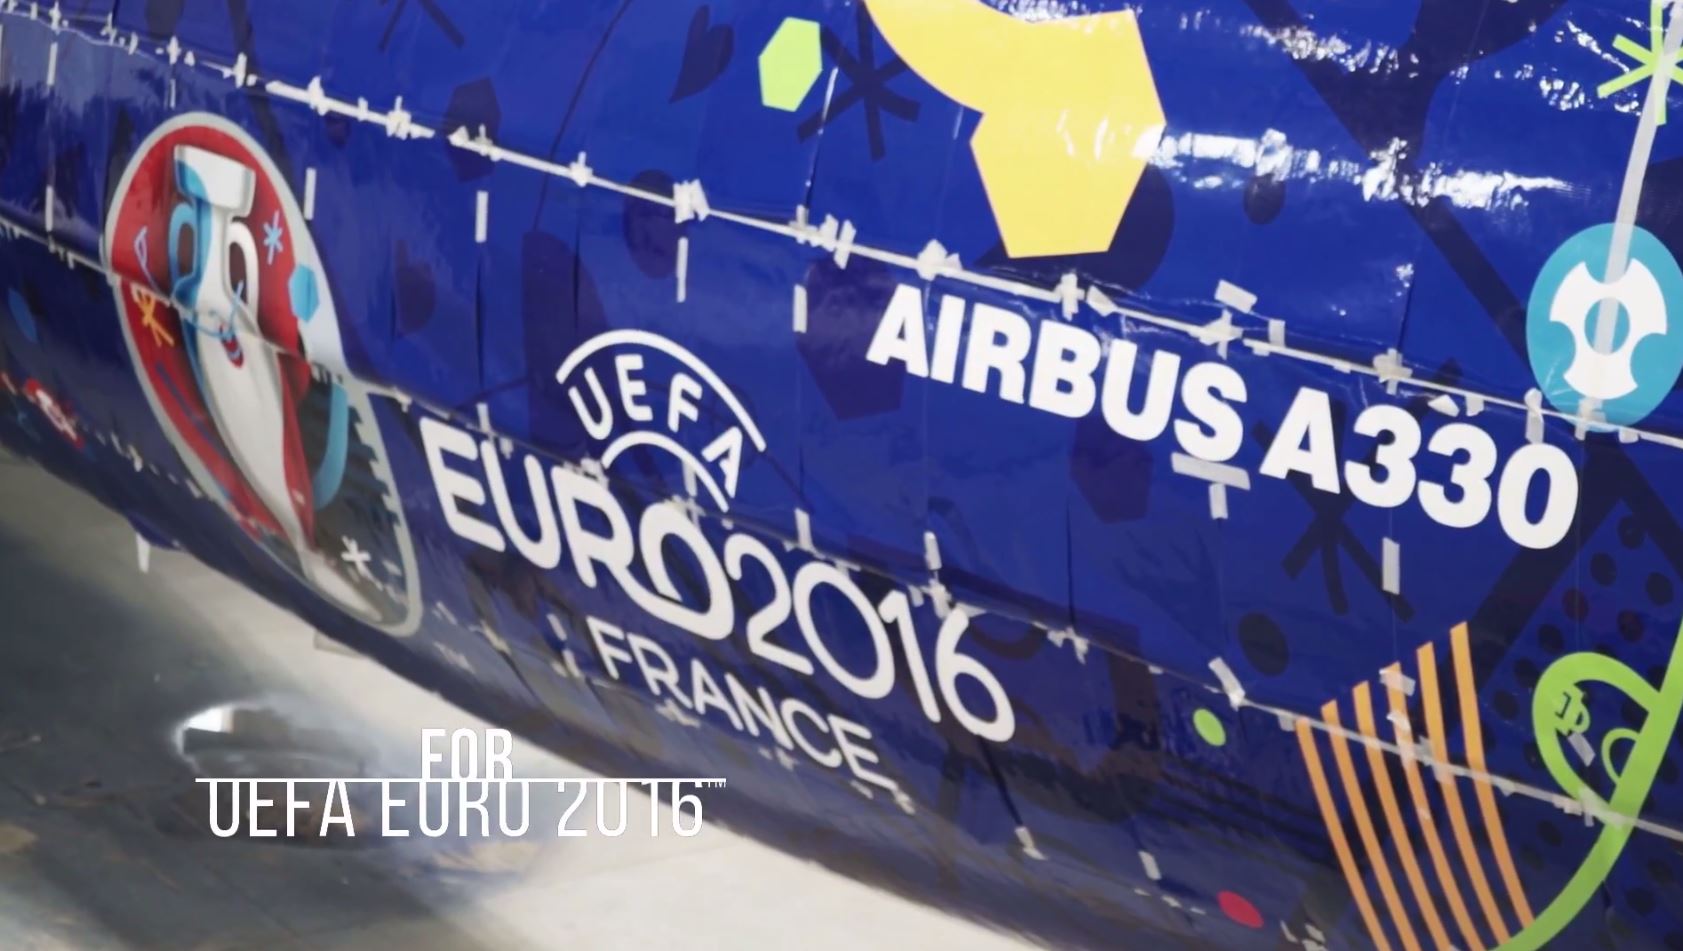 Turkish Airlines Airbus A330 – Euro 2016 Livery